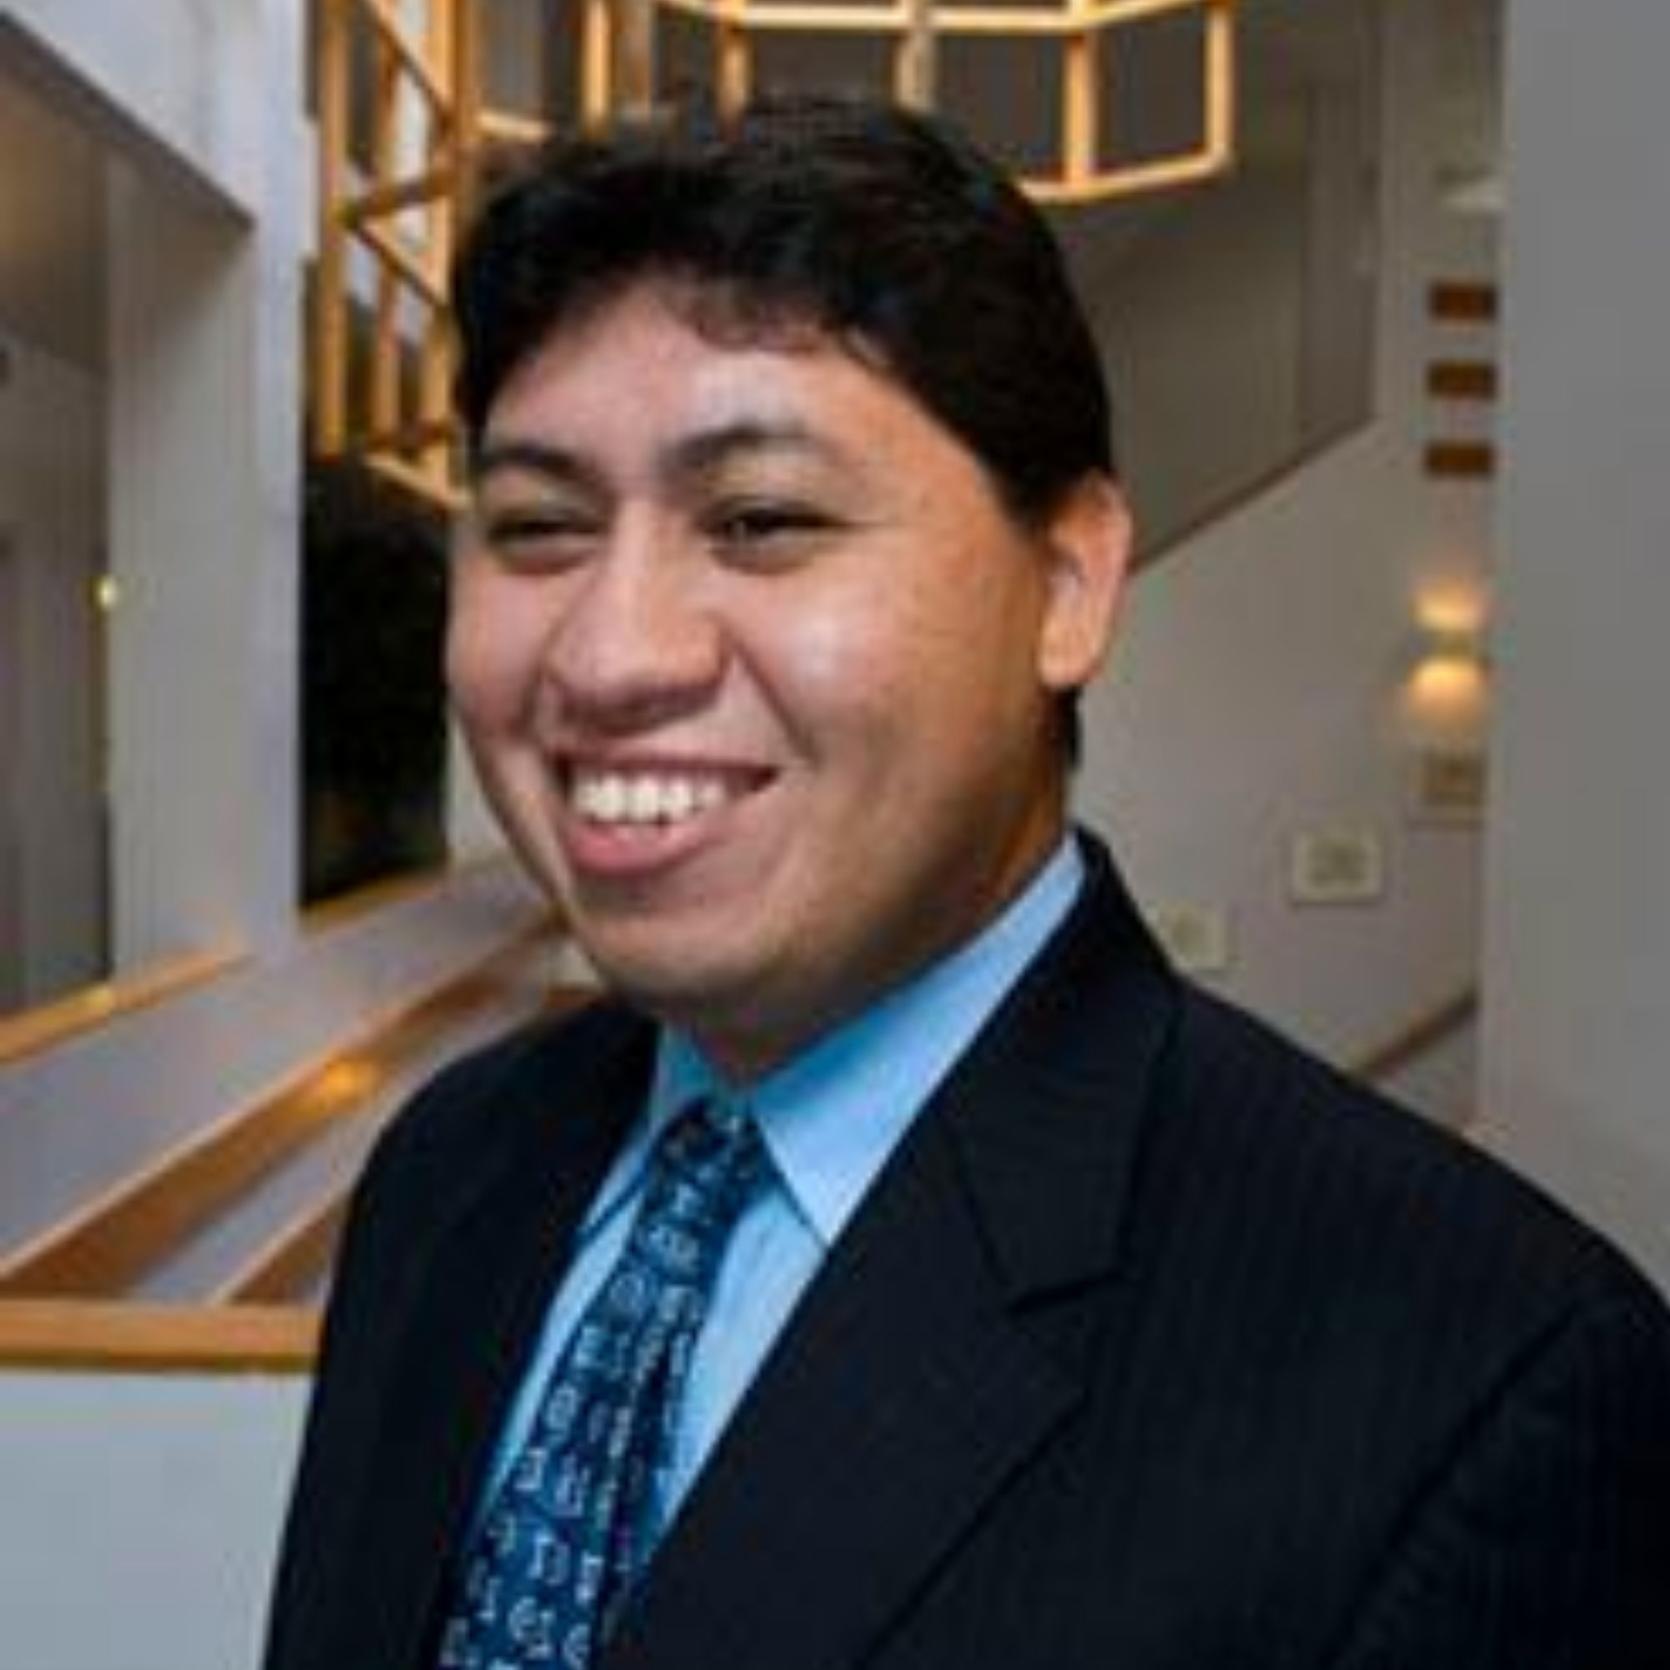 Joe Quintanilla Headshot, Vice President of Development and Major Gifts at National Braille Press